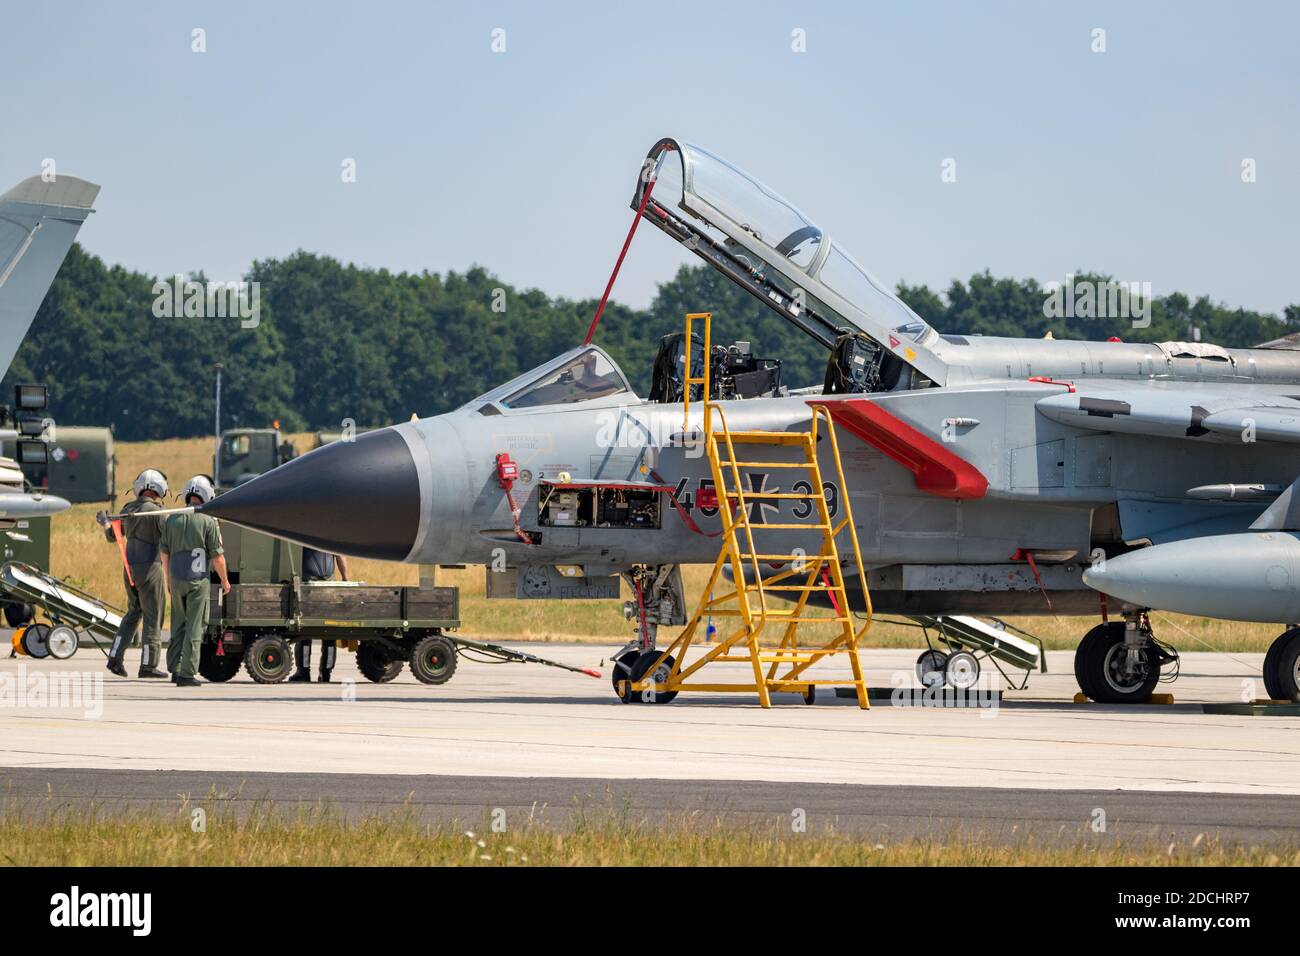 Panavia Tornado bomber jet from the German Air Force on the tarmac of Wunstorf airbase. Germany - June 9, 2018 Stock Photo